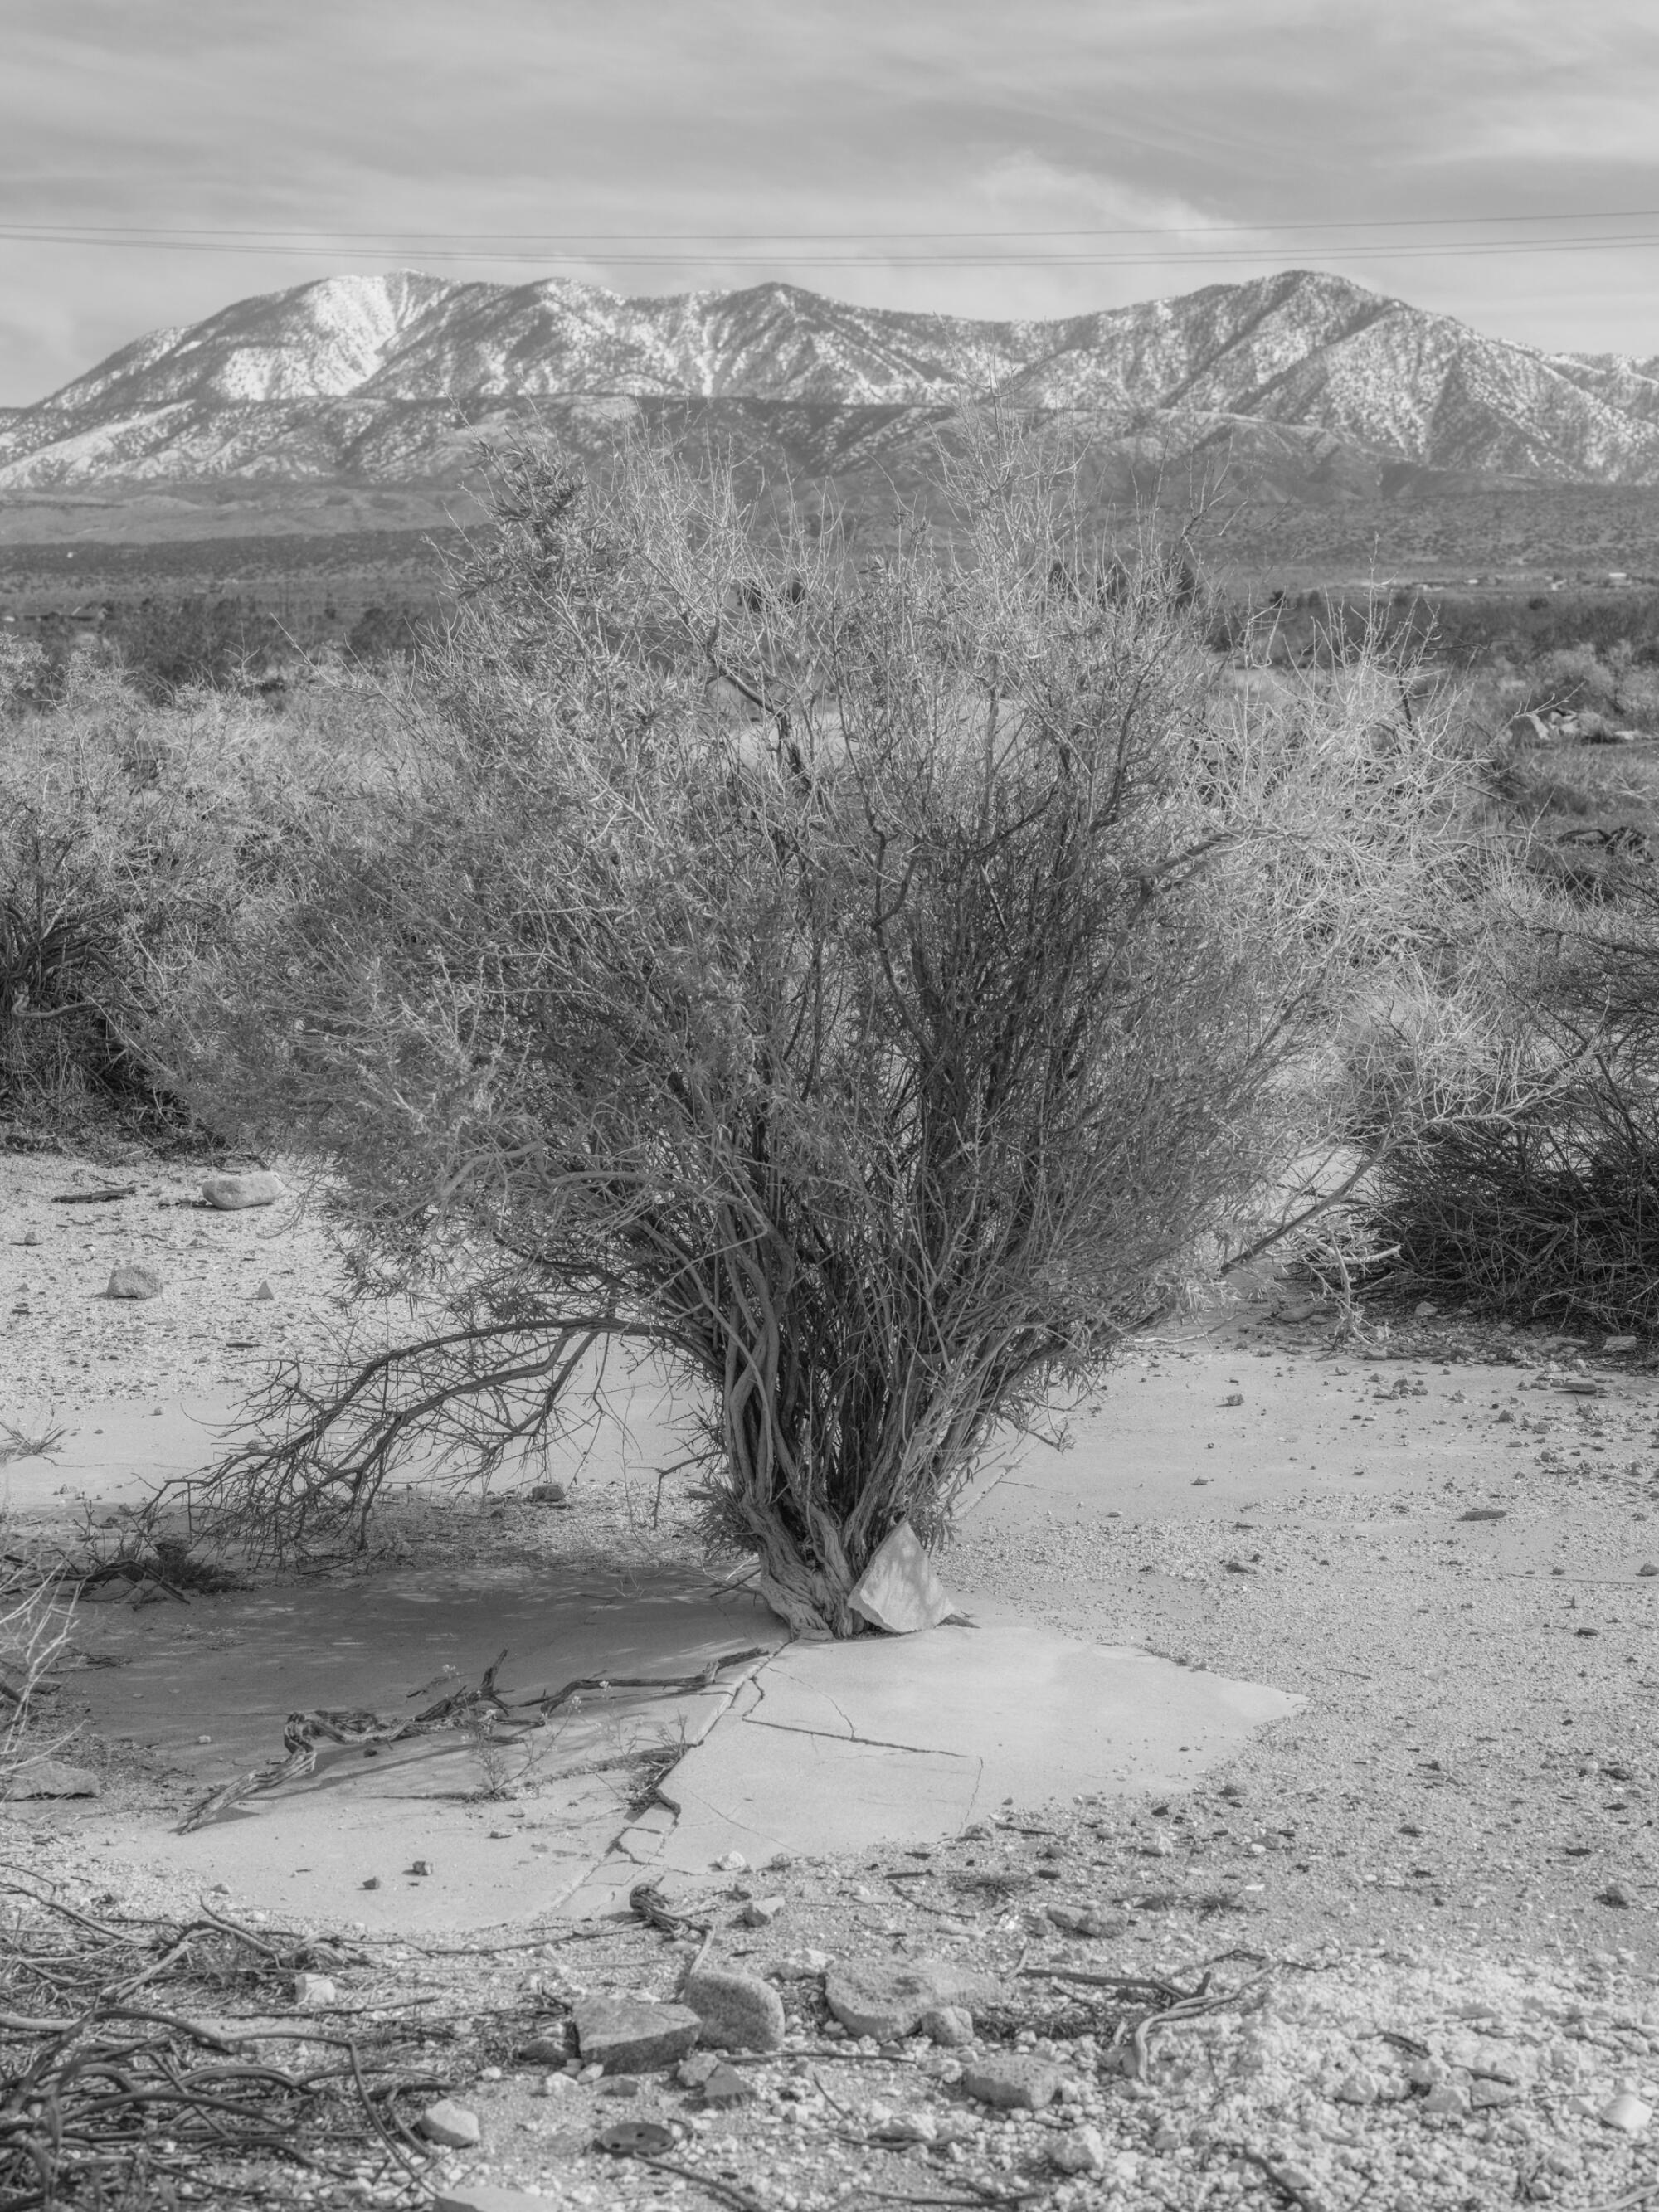 An image of a tree in the desert, the mountains in the background.